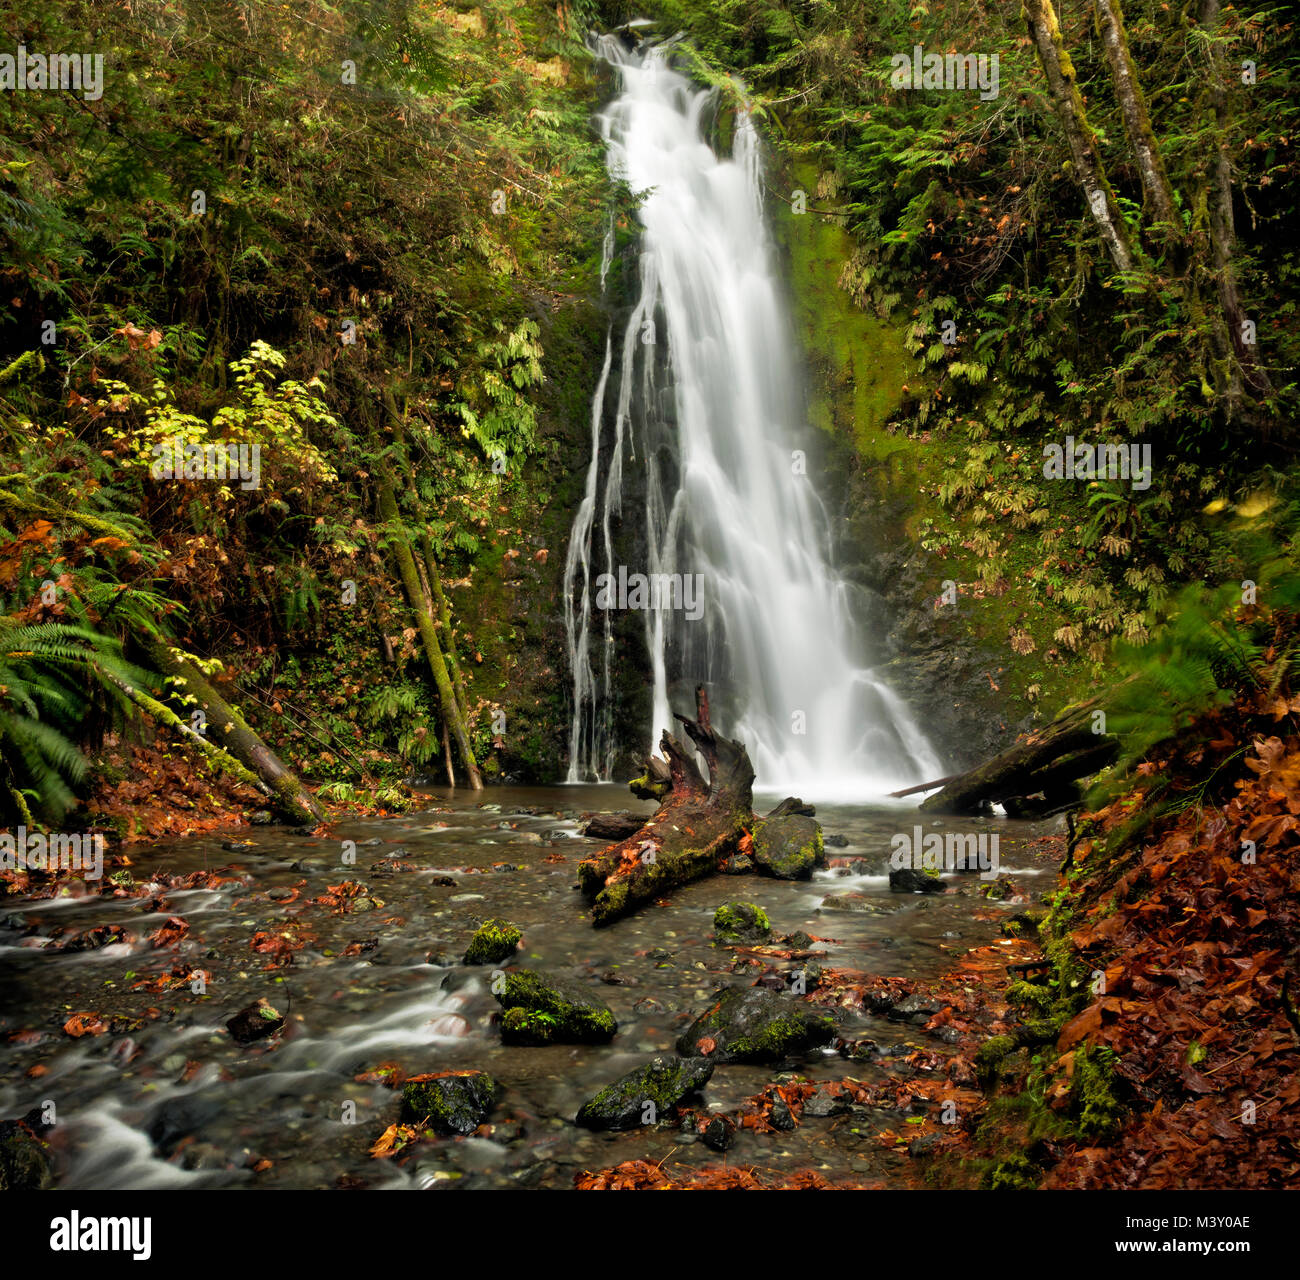 WA13373-00...WASHINGTON - Fall color at Madison Falls in the Elwha River Valley of Olympic National Park. Stock Photo